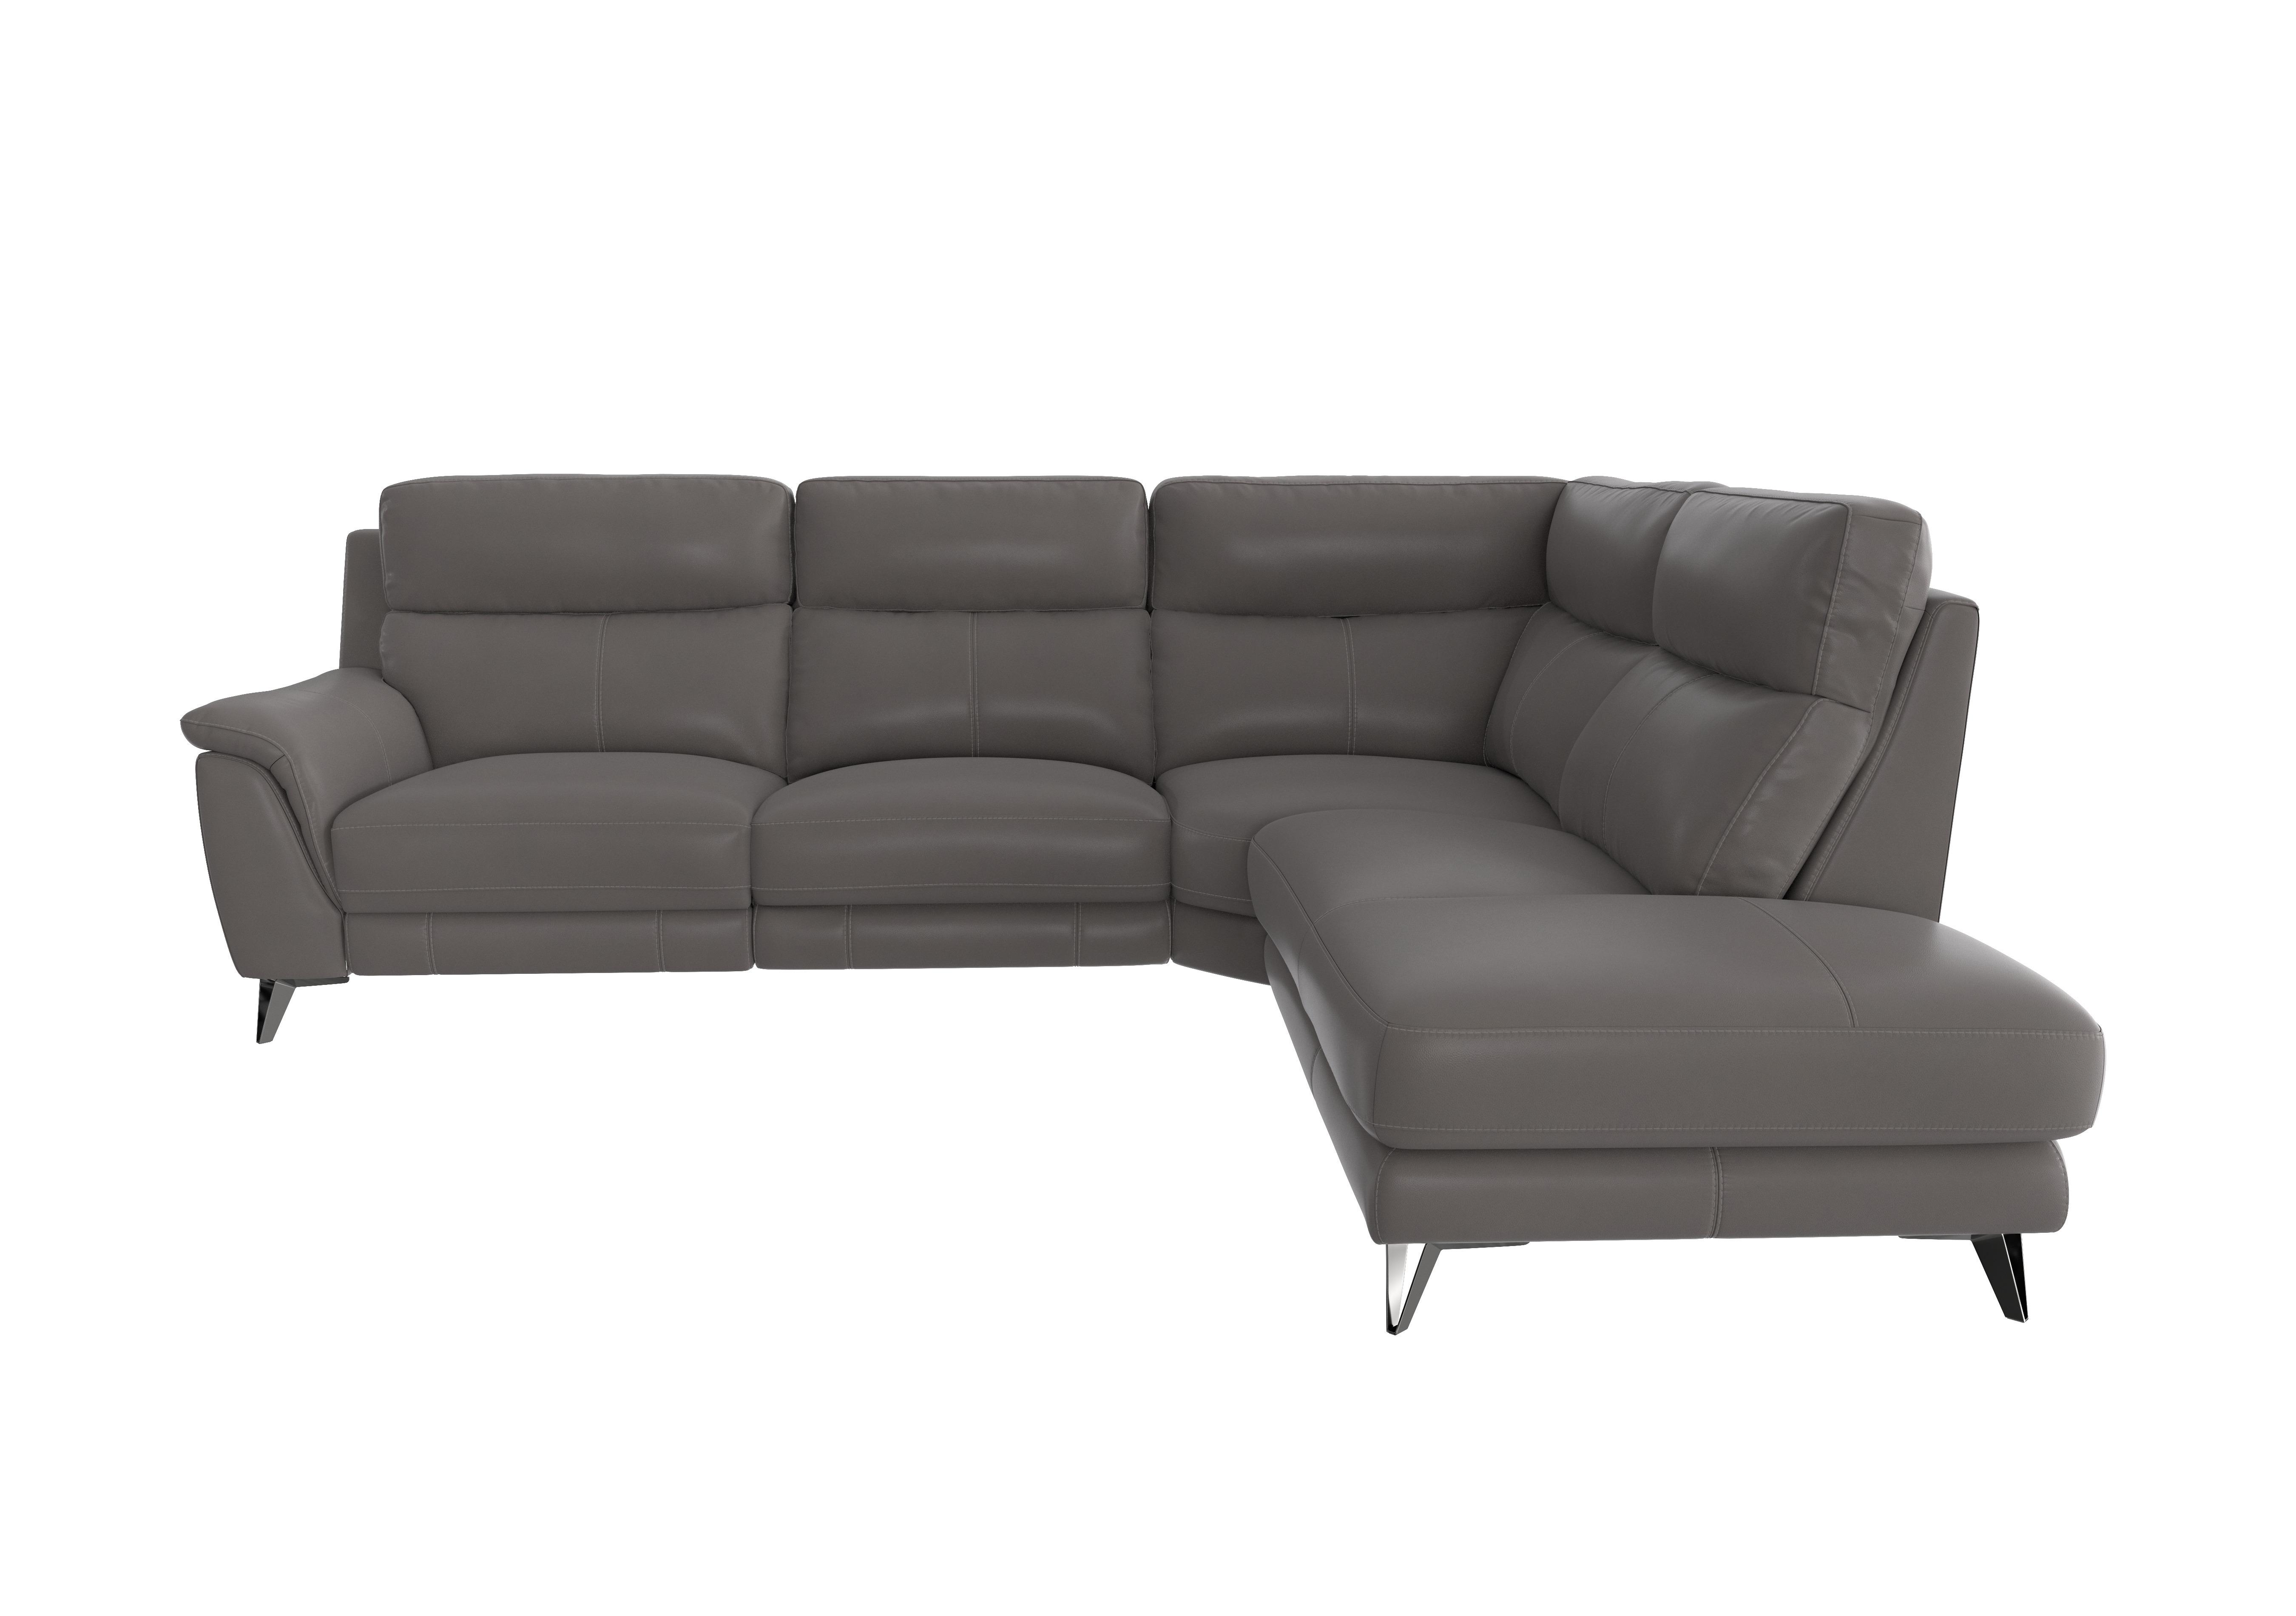 Contempo Chaise End Leather Sofa in Bv-042e Elephant on Furniture Village